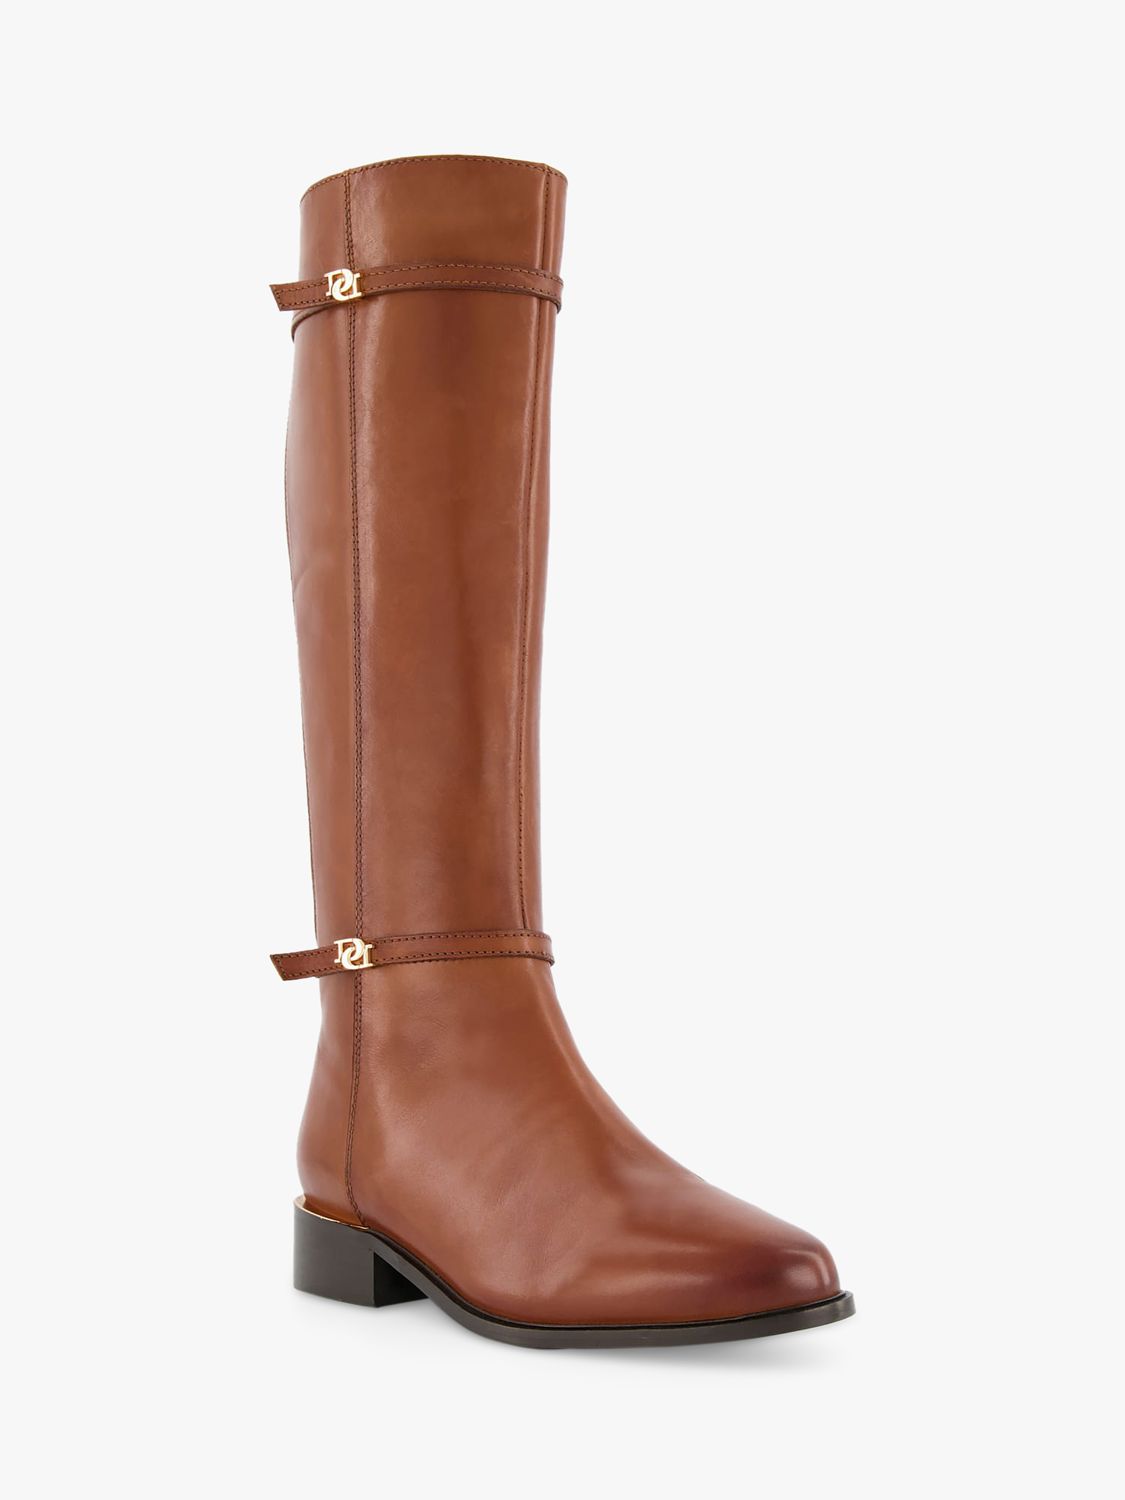 Buy Dune Tap Leather Knee High Boots Online at johnlewis.com